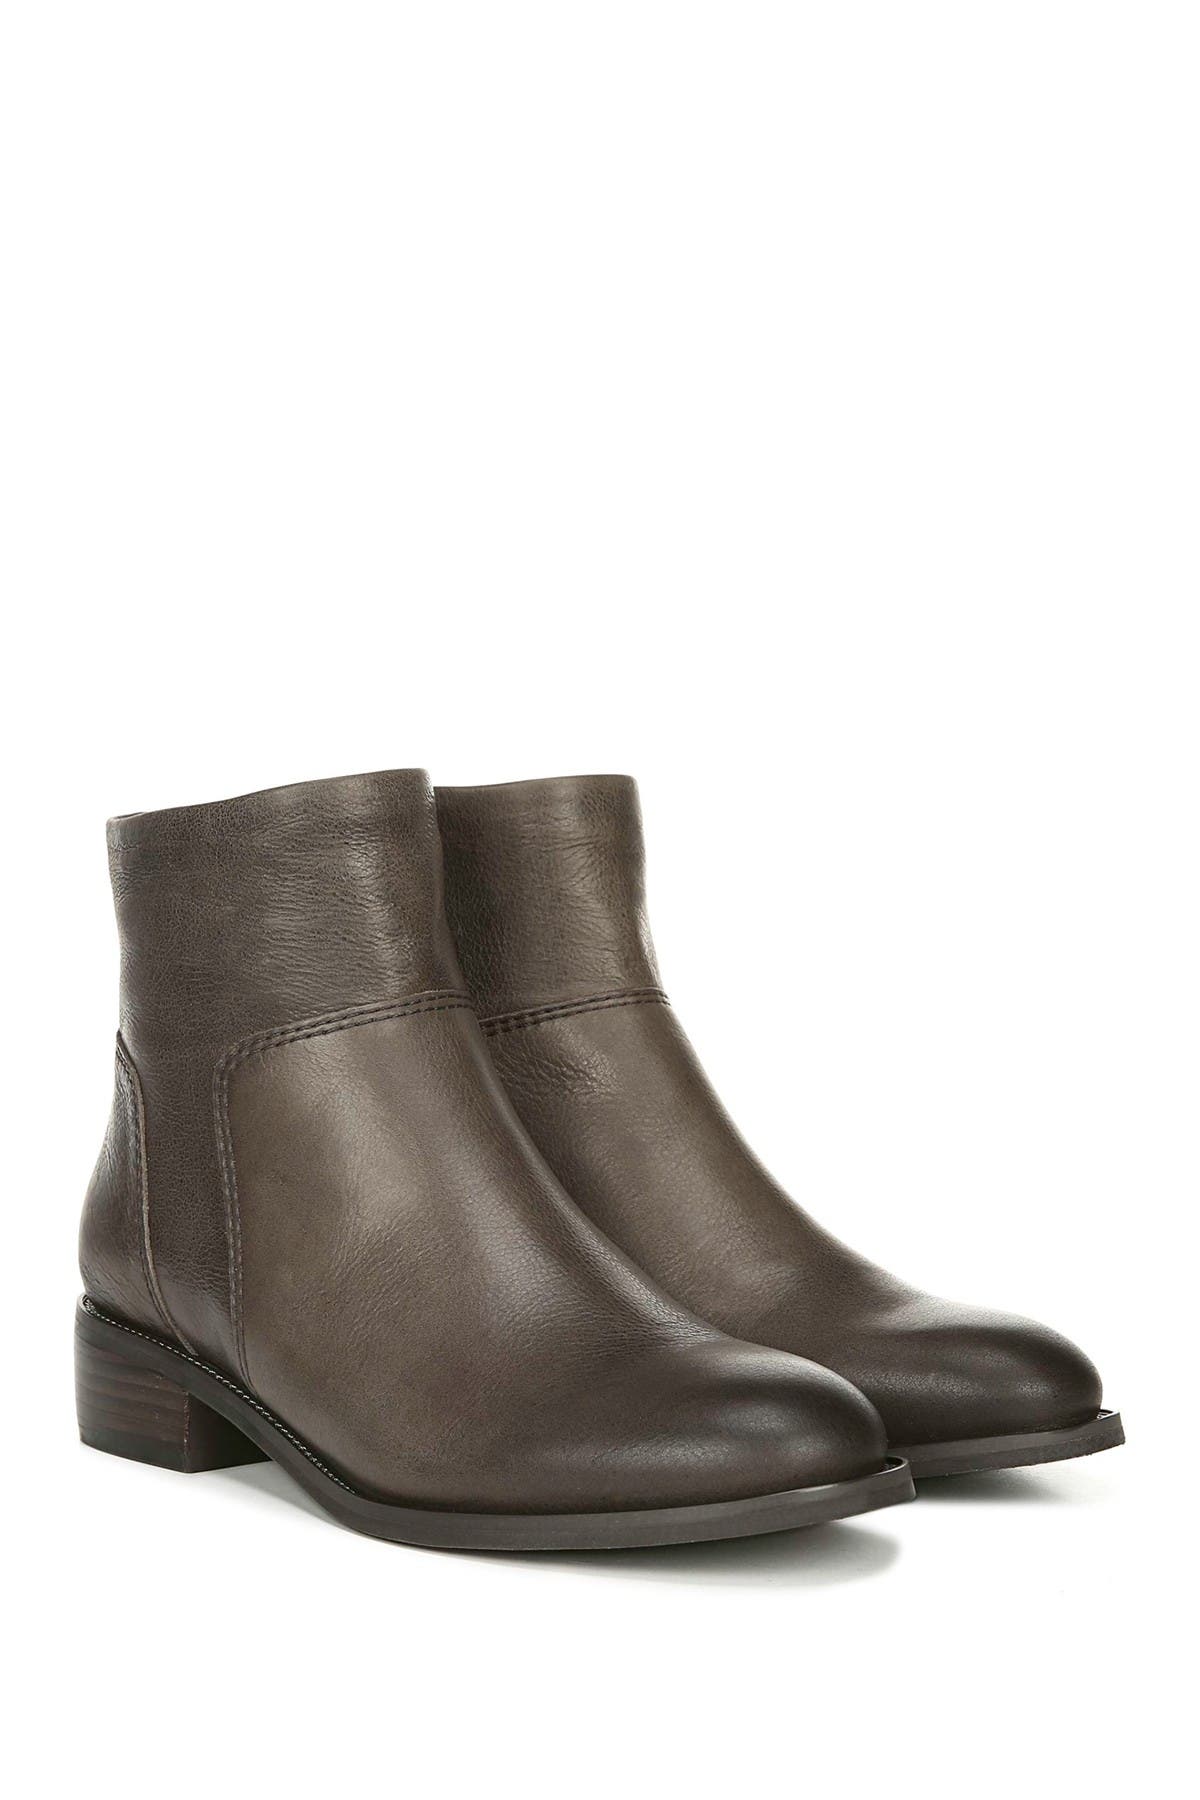 Franco Sarto | Benny Leather Ankle Boot 